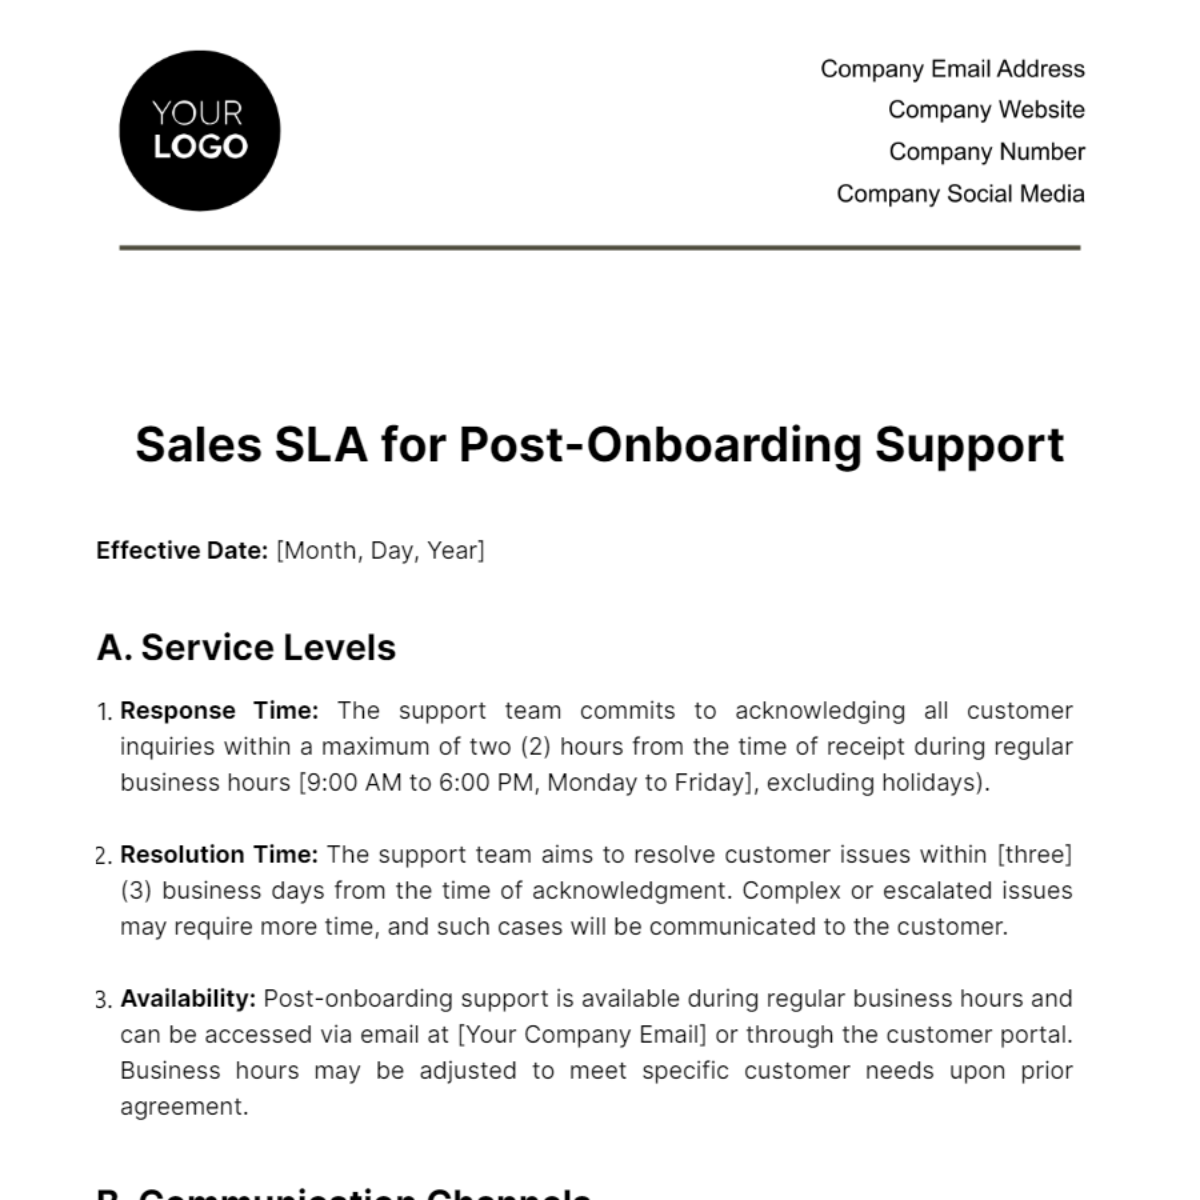 Free Sales SLA for Post-Onboarding Support Template